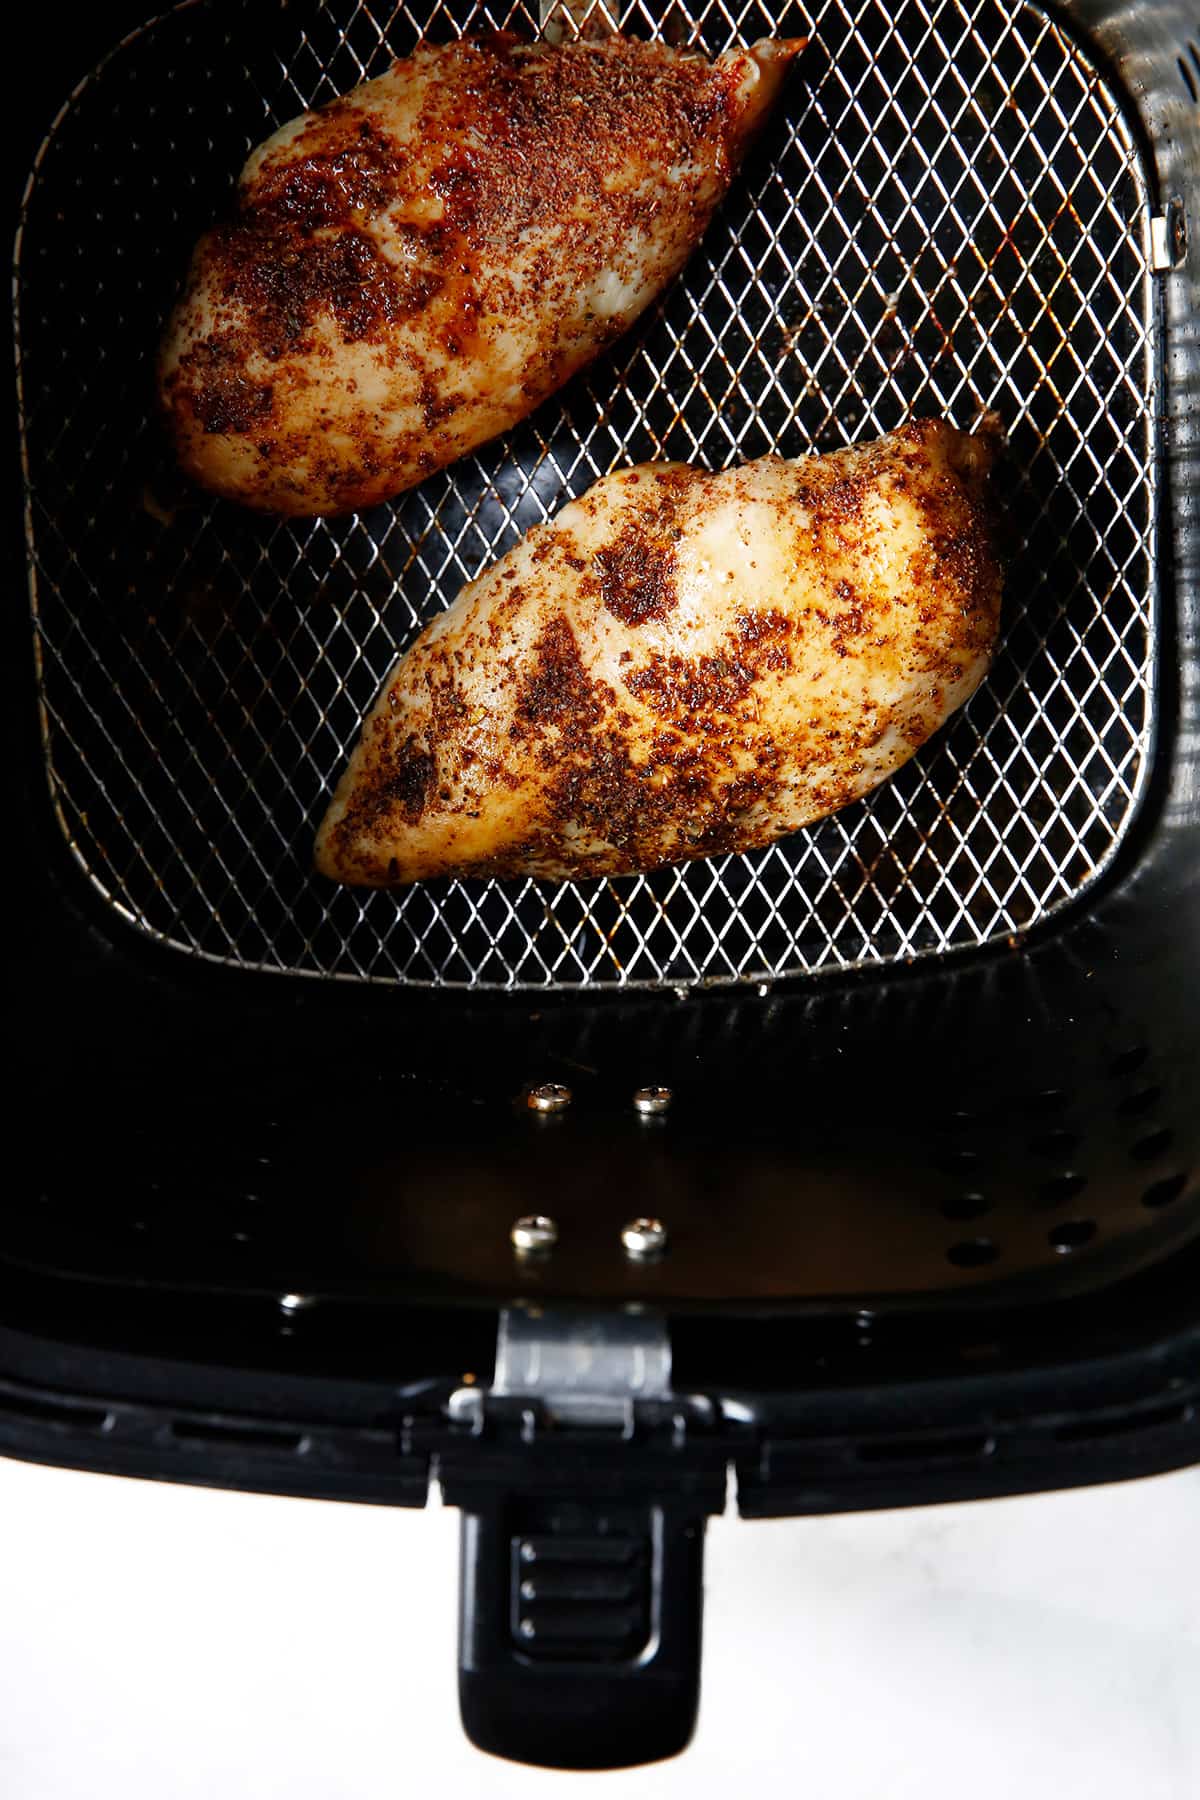 The Juiciest Air Fryer Chicken Breast - Simply Delicious